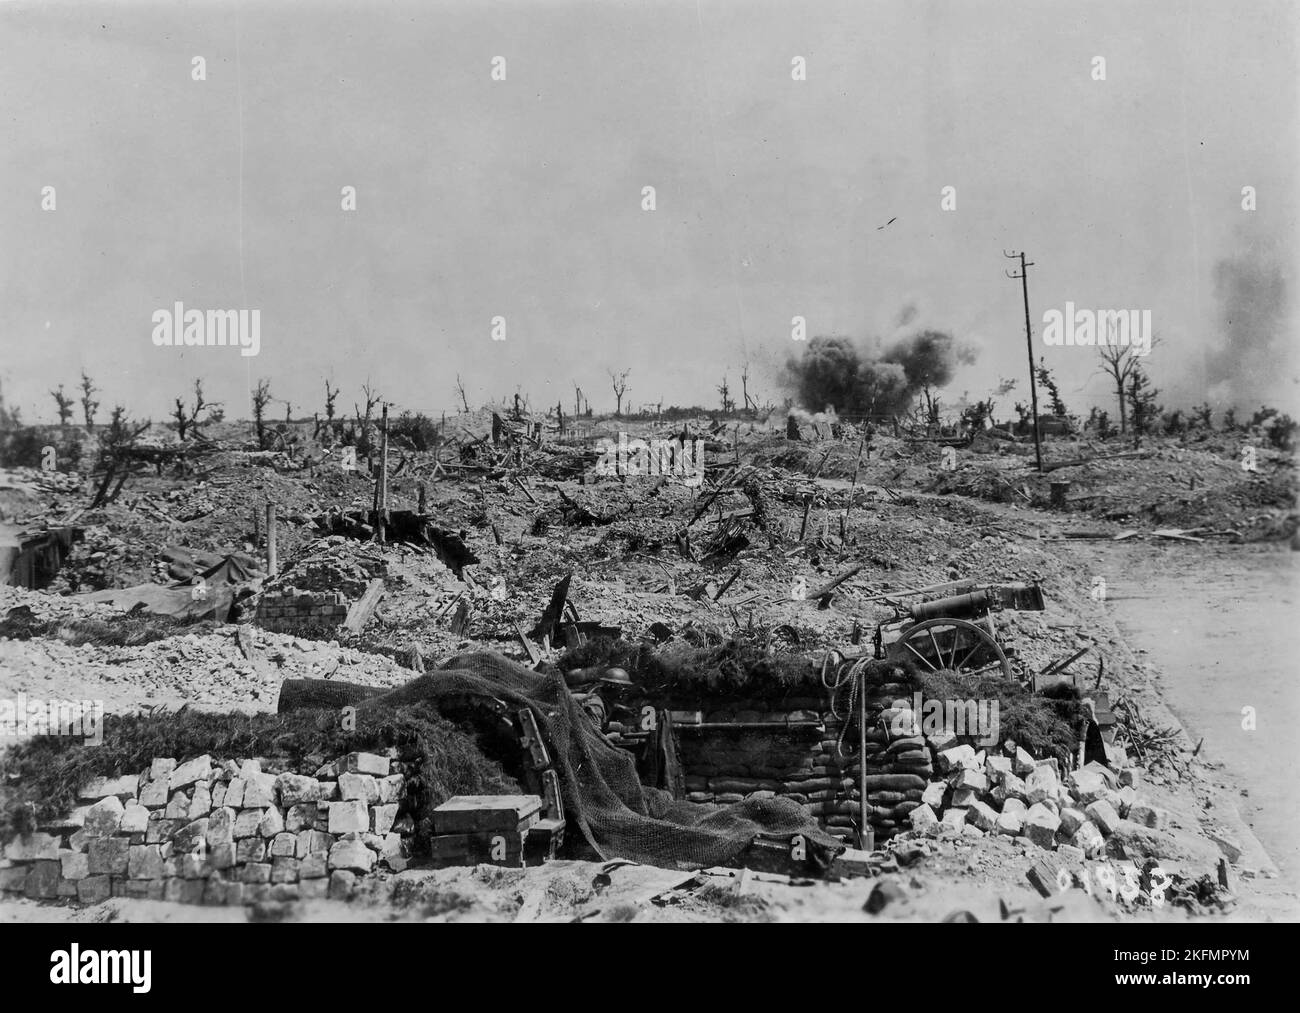 LENS, FRANCE - Jun 1917 - German shells bursting on Canadian positions at Lens, France in June 1917. In the foreground, a Canadian gun pit is camoufla Stock Photo